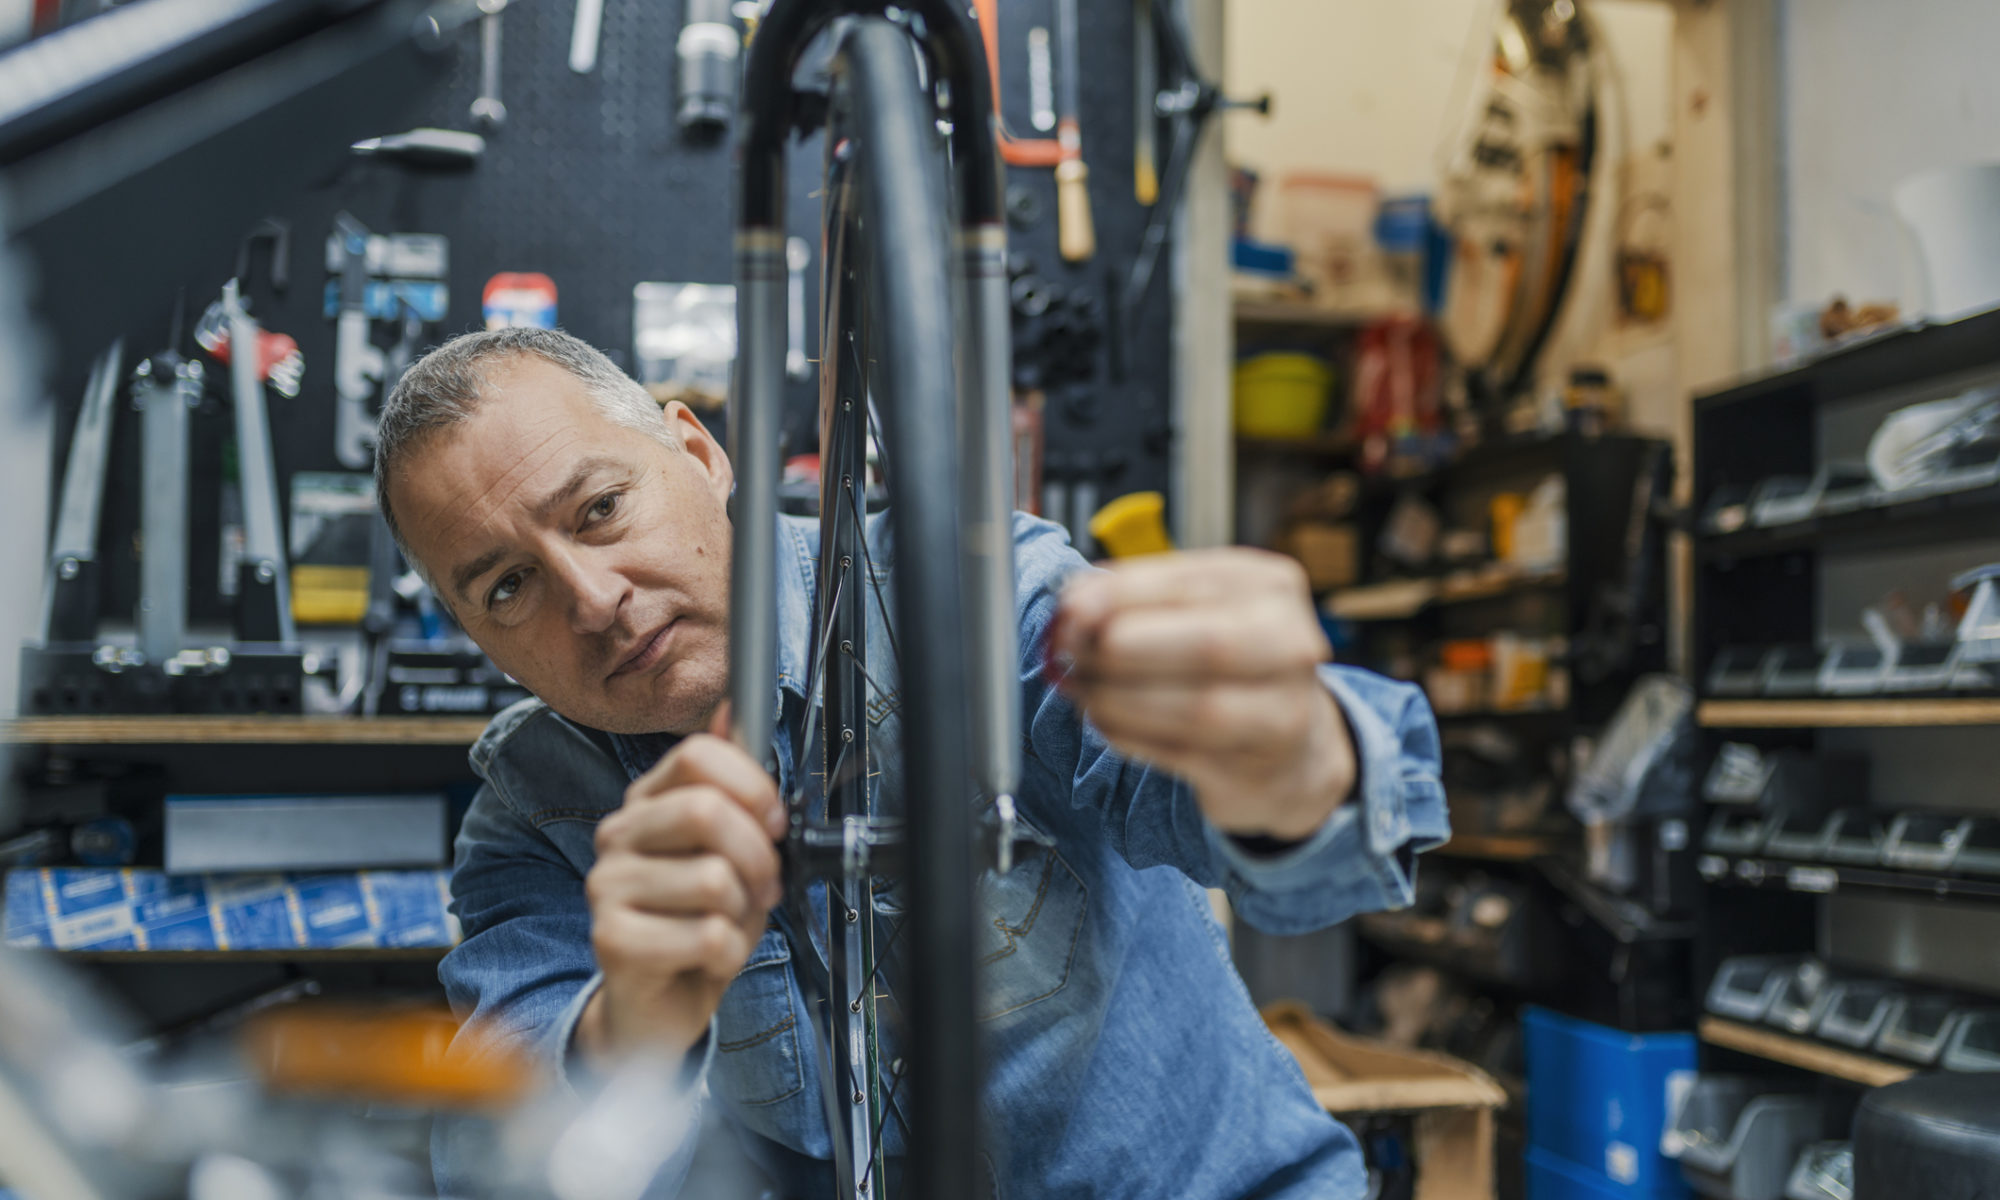 Male dressed in blue fixing a bicycle in a bicycle shop